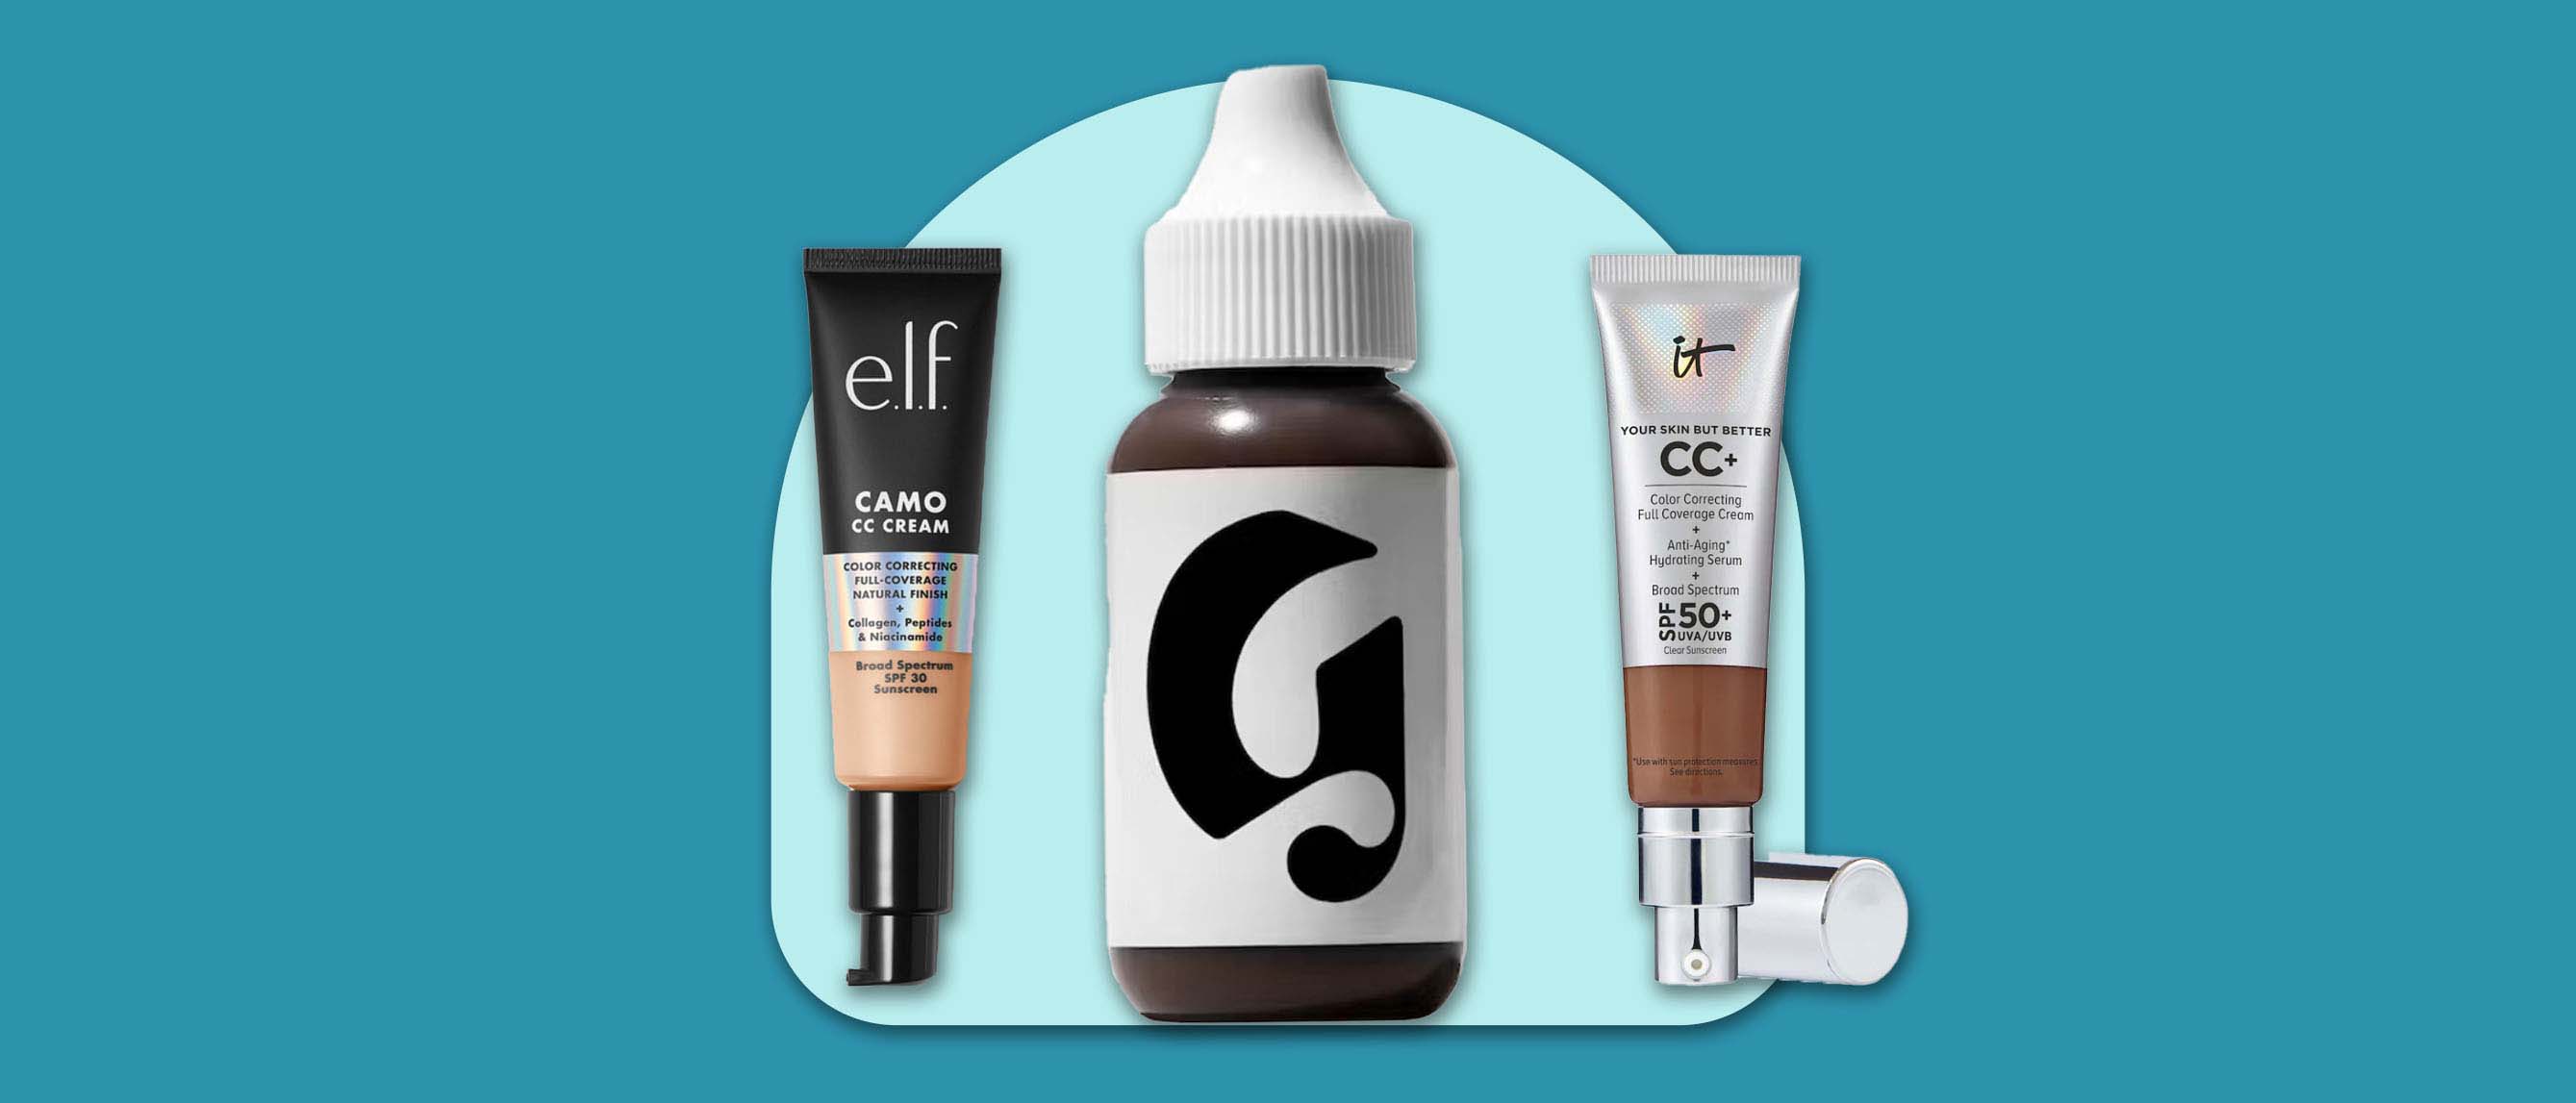 Image of 3 CC creams including glossier, it and elf